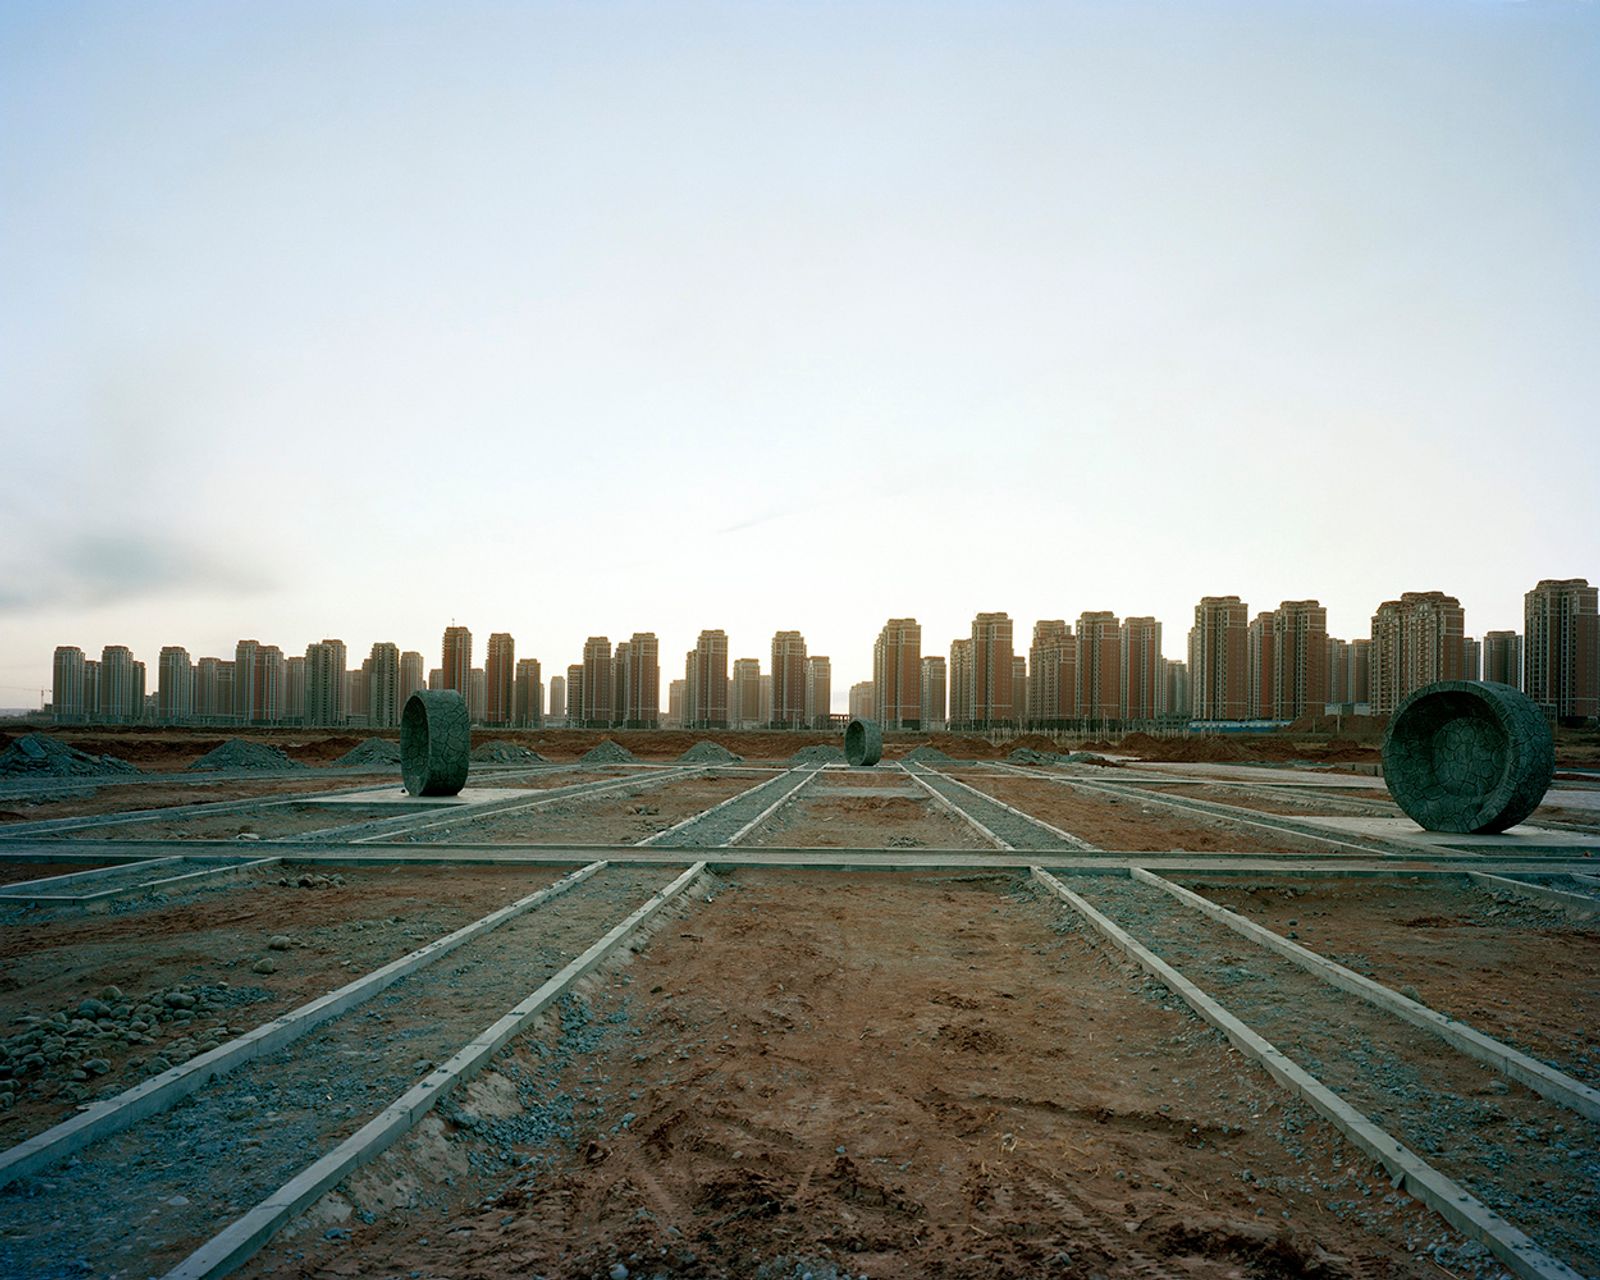 © Julien Chatelin - Image from the China West  photography project